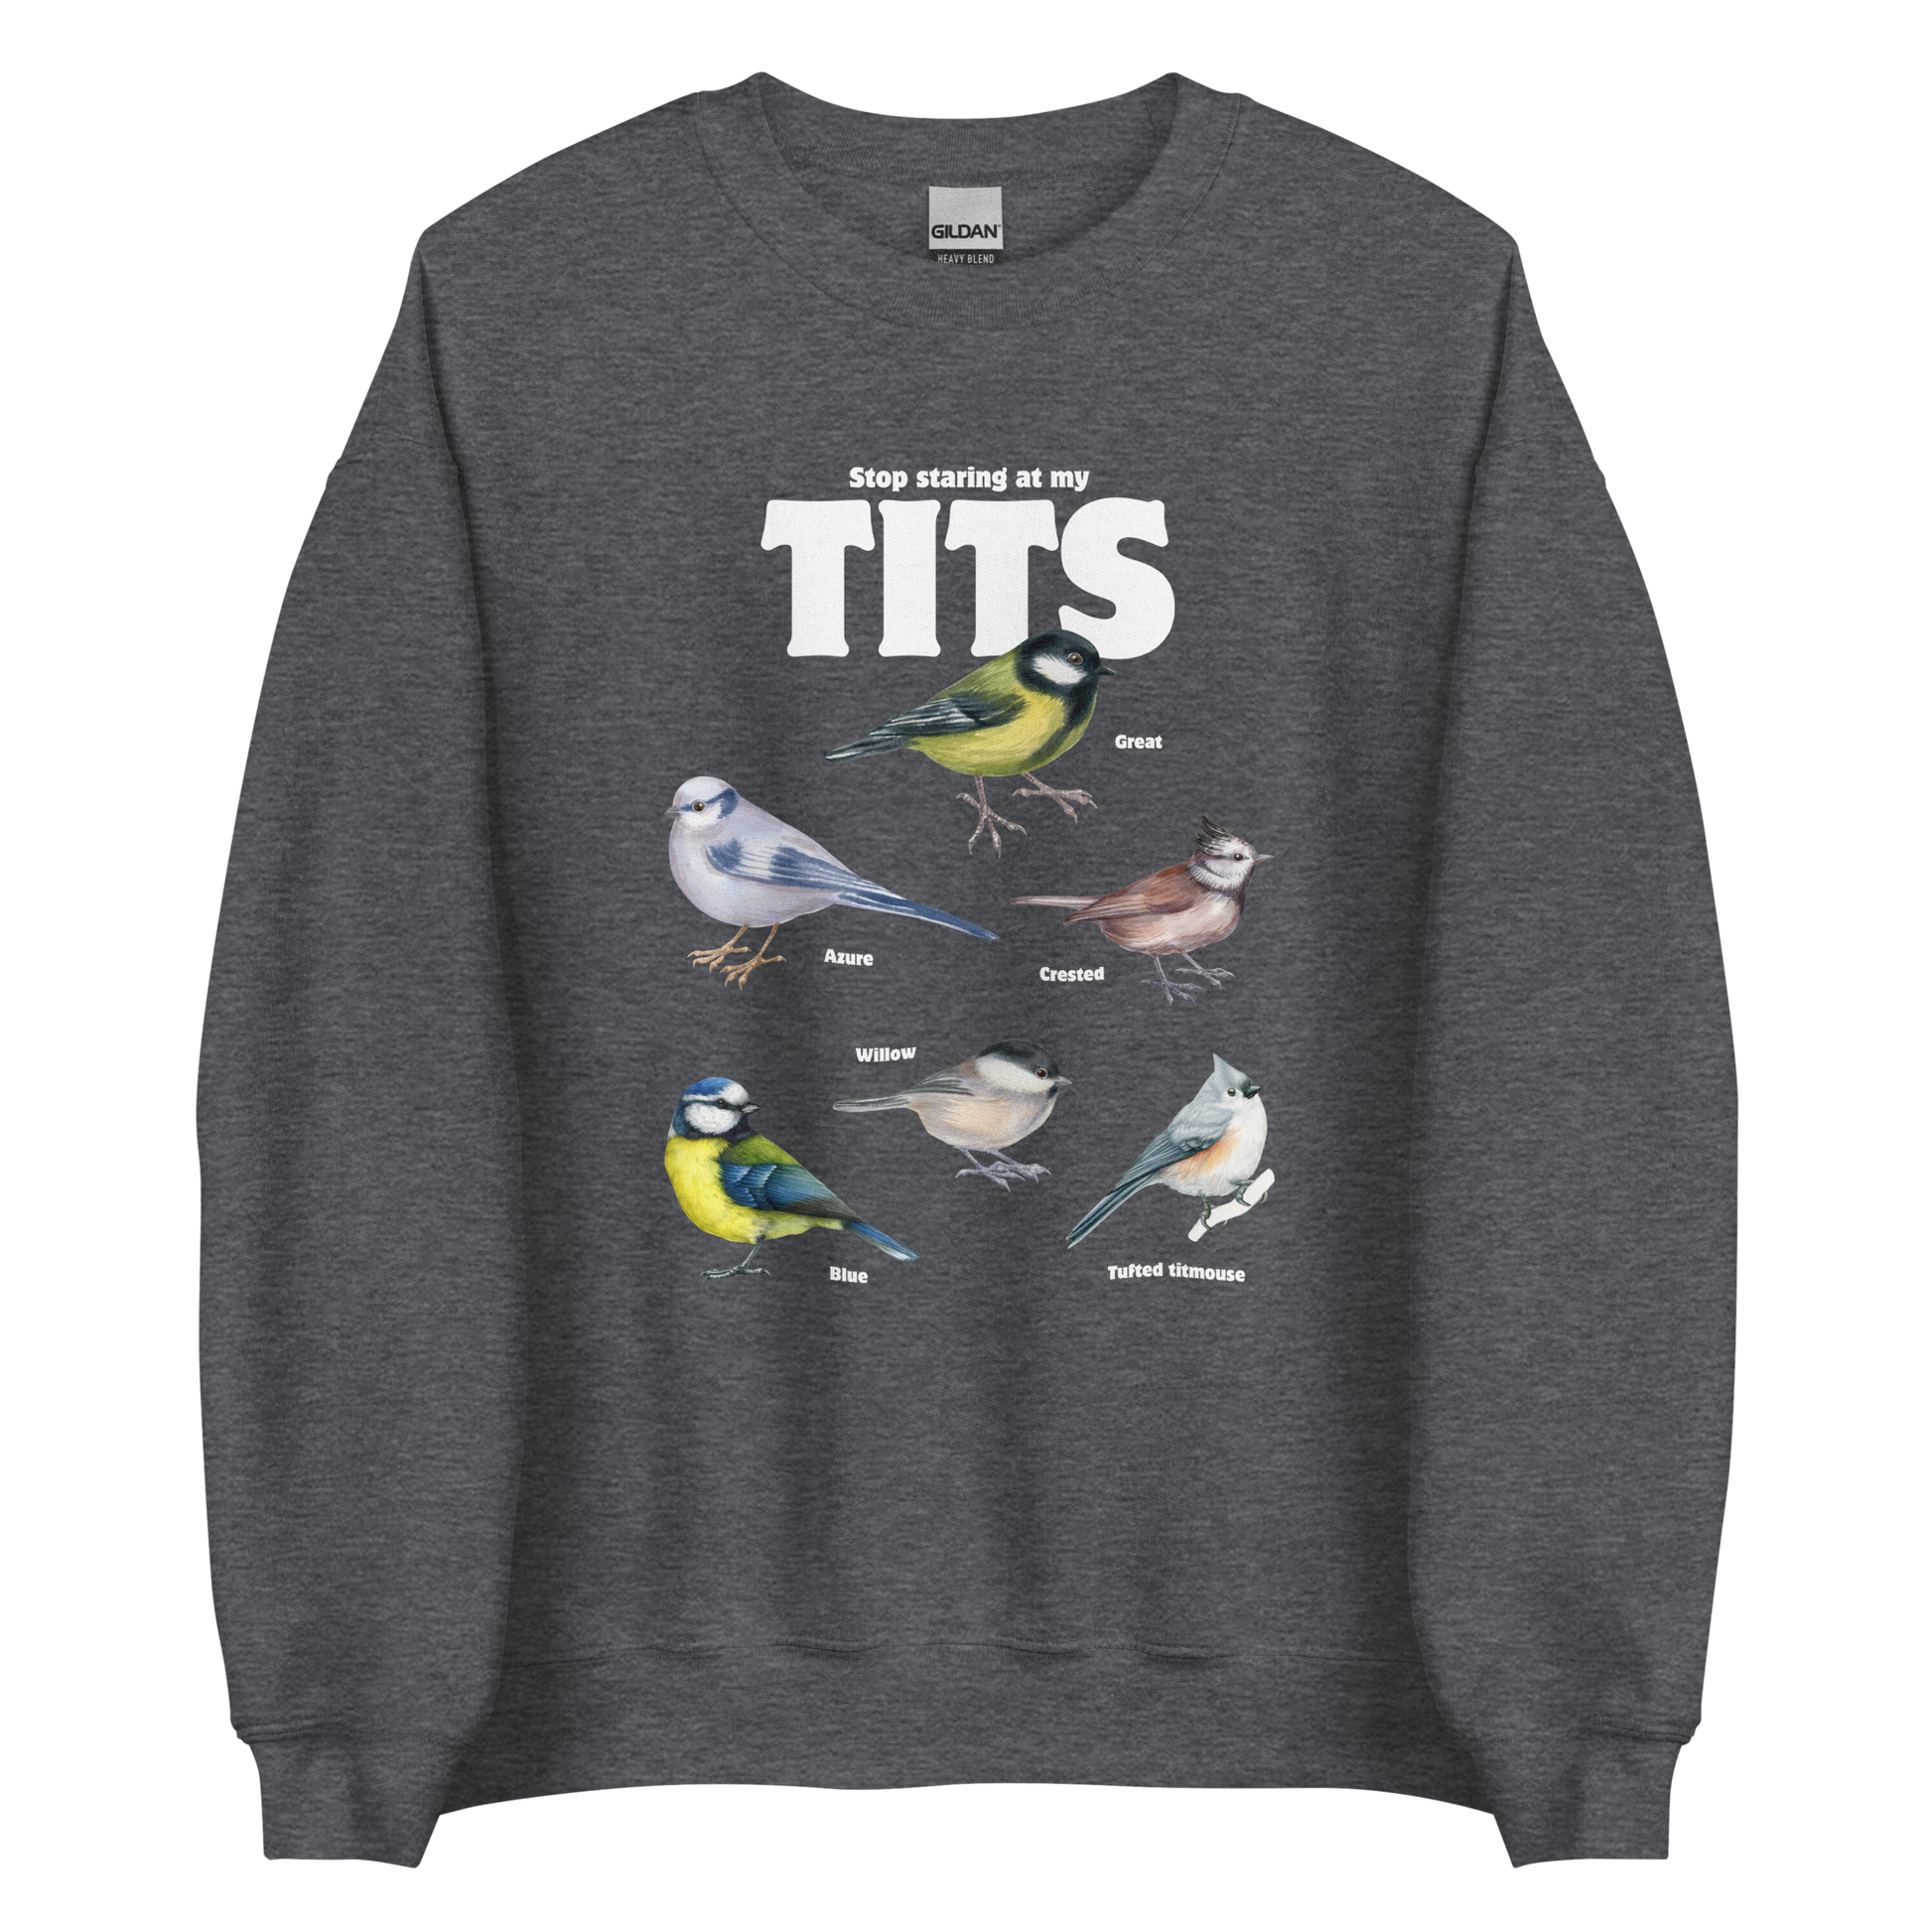 Dark Heather Tit Sweatshirt featuring a funny Stop Staring At My Tits graphic on the chest - Funny Graphic Tit Bird Sweatshirts - Boozy Fox